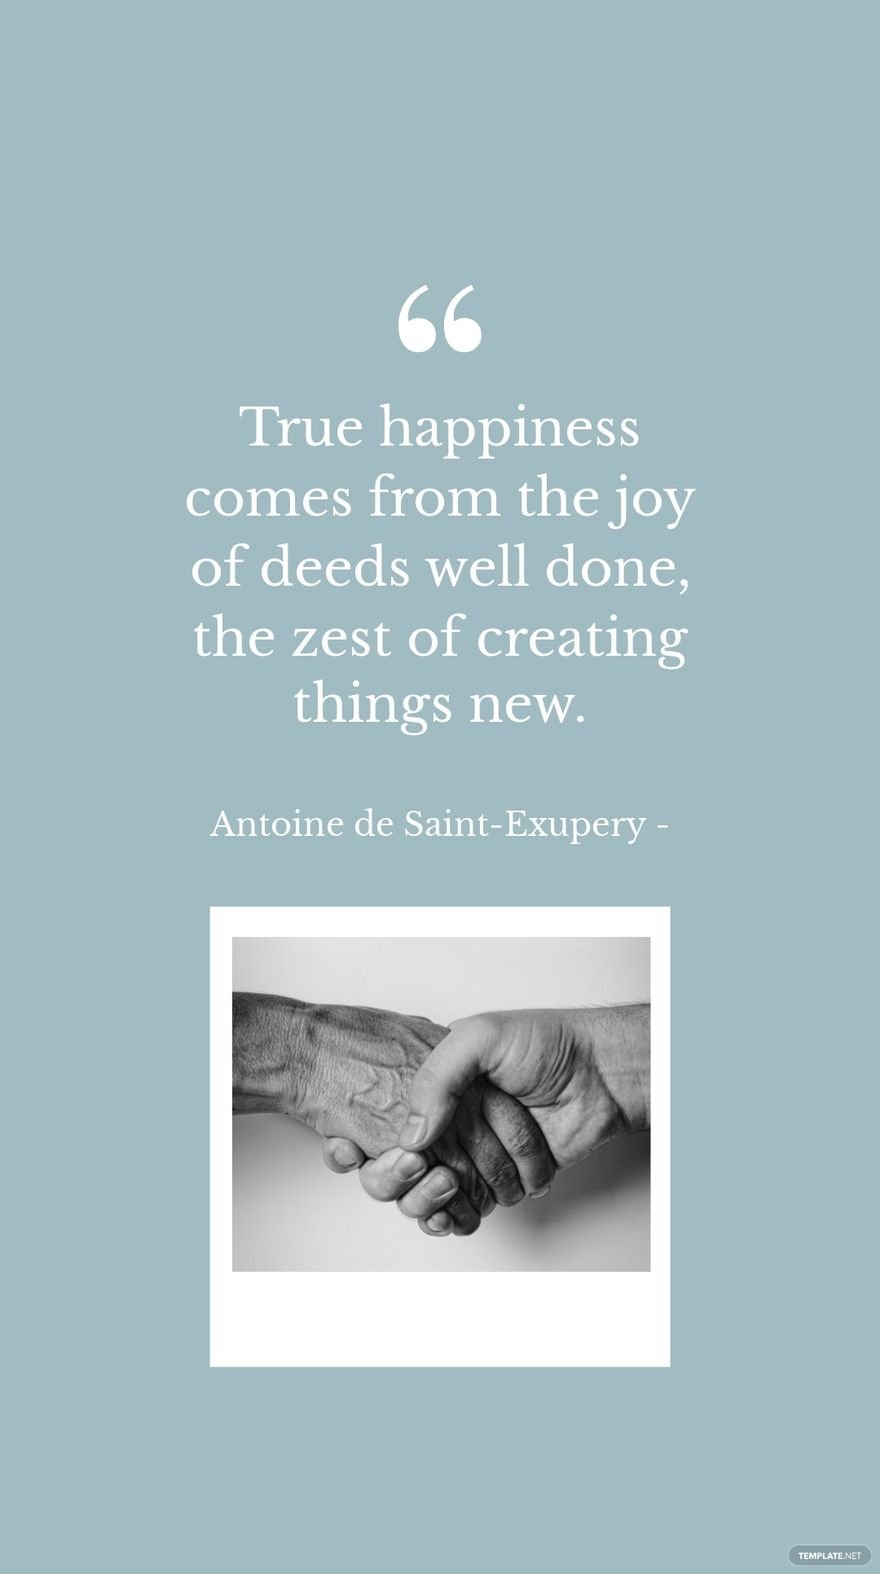 Free Antoine de Saint-Exupery - True happiness comes from the joy of deeds well done, the zest of creating things new. in JPG